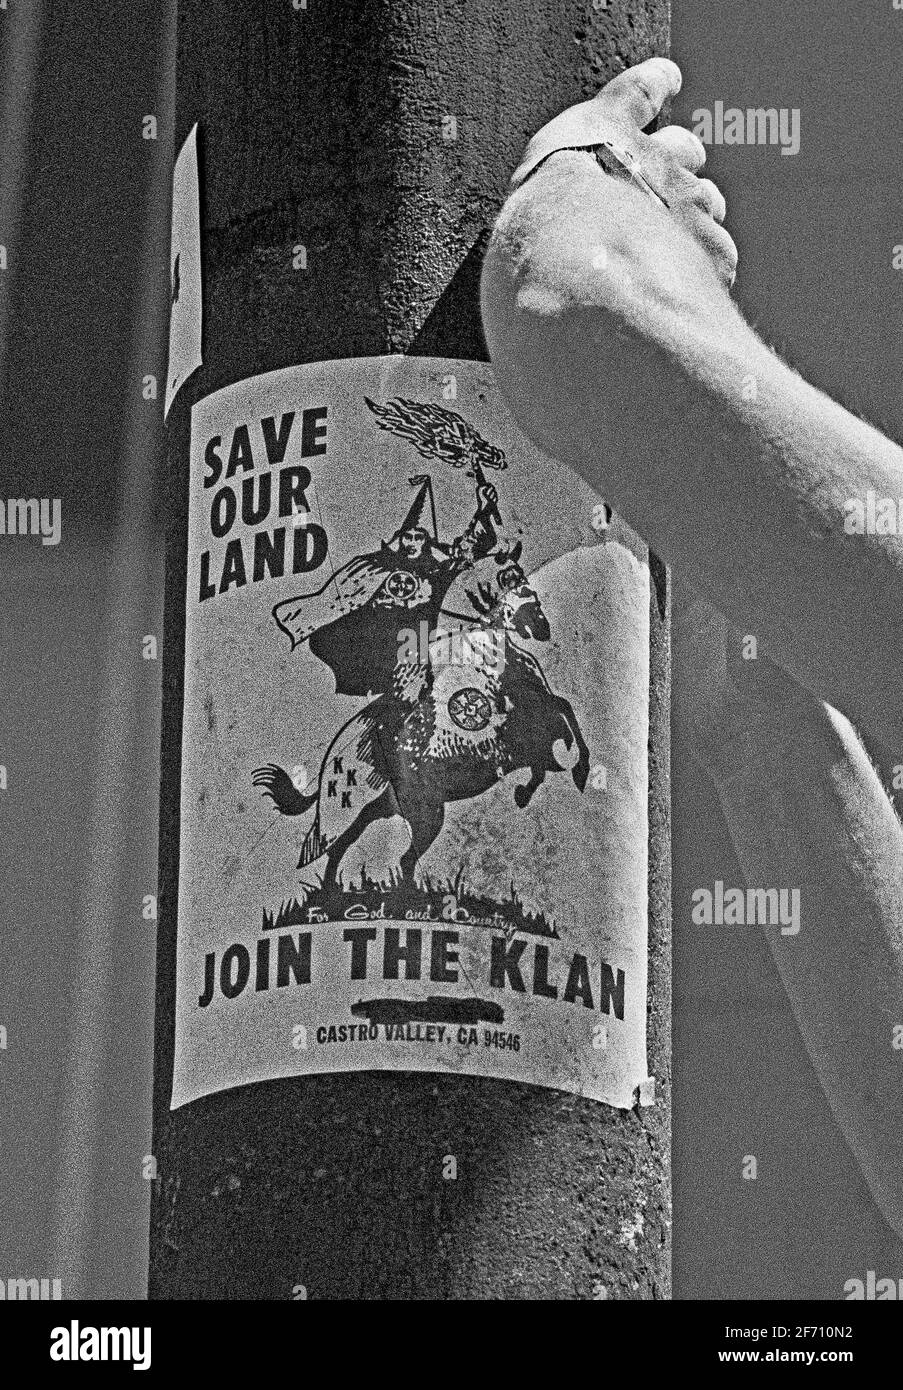 Save our land, join the Klan poster on pole in San Francisco, California during a rally protesting racism in the military, on August, 27, 1977 Stock Photo